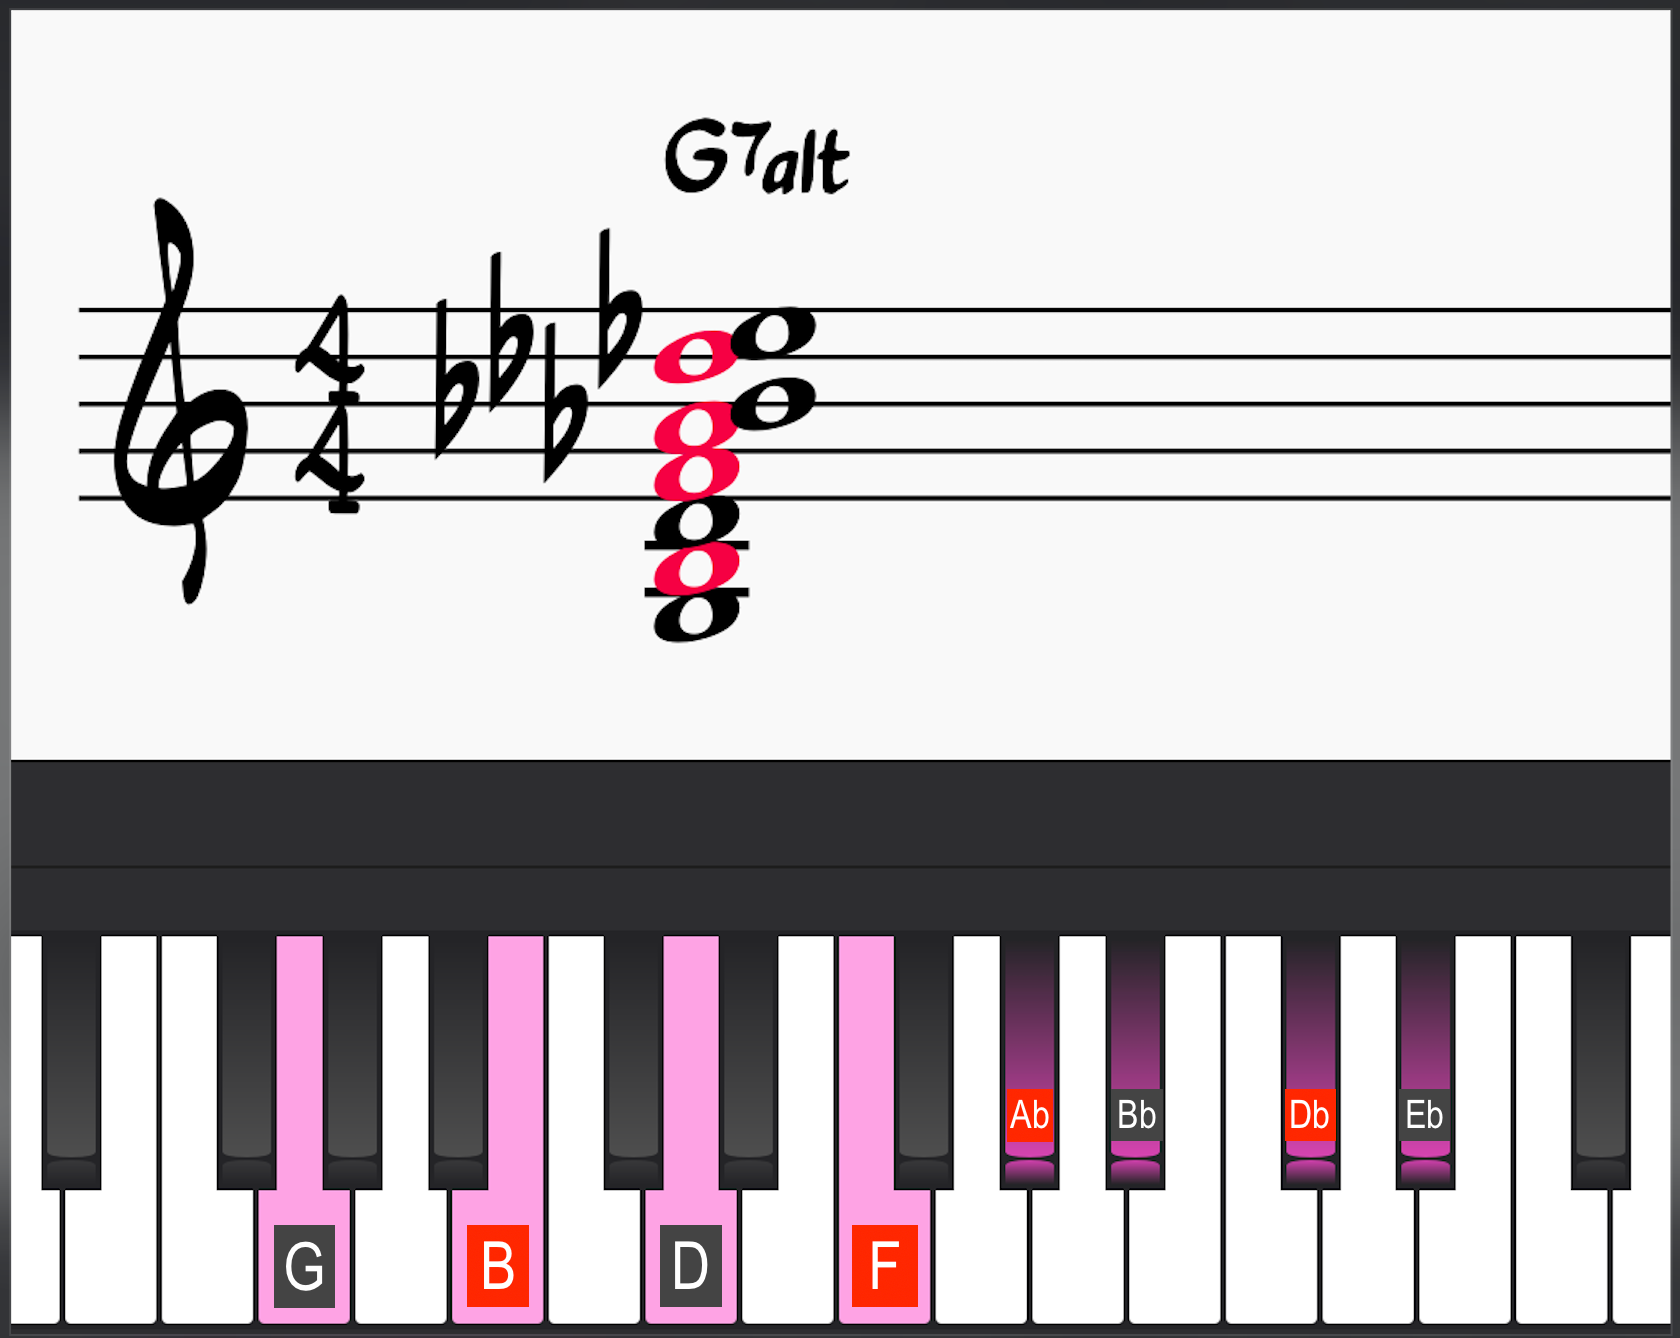 Fully altered G7 chord with Db7 notes colored in red on piano